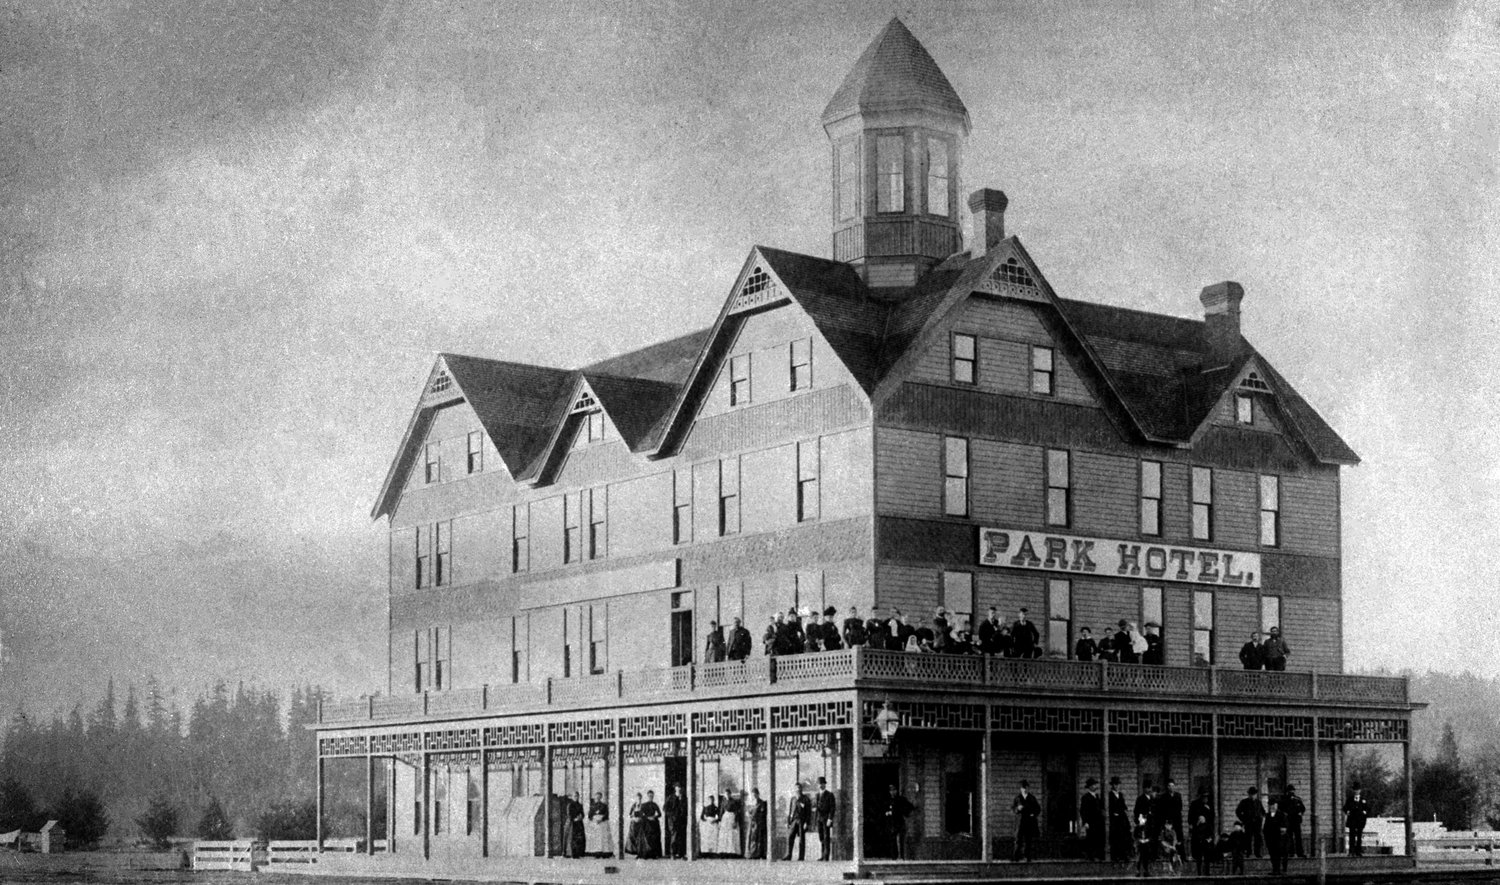 From The Chronicle archives: “Fancy hotel has unusually short life: One of Centralia’s first and finest hotels had an unusualy short life. The Park Hotel opened Jan. 18, 1890, at the corner of North Tower Avenue and Fifth Street. The hotel burned down six years later. The four-story structure was built in 1889 for $13,000. It was given its name for its location — across the street for an early park in the north end of the city. Capt. M. Robinson managed the Park Hotel, which featured accommodations for 100 guests and boasted about electric lights, hot baths and a billiard room. But the lustrous hotel was reduced to ashes March 3, 1896. In a way, it was its gradeur that brought it down. The fire apparently started in the uppermost part, an area under the fourth story roof called the garrett. The fire department was unable to reach the flames and the fire ripped through the wooden structure. Though it was insured for $4,900, only $380 of the claim was paid. Because of that, and with the shift of the business district of Centralia south to its present location and the advent of a depression, the Park Hotel was never rebuilt. Reprinted from the files of The Daily Chronicle.”